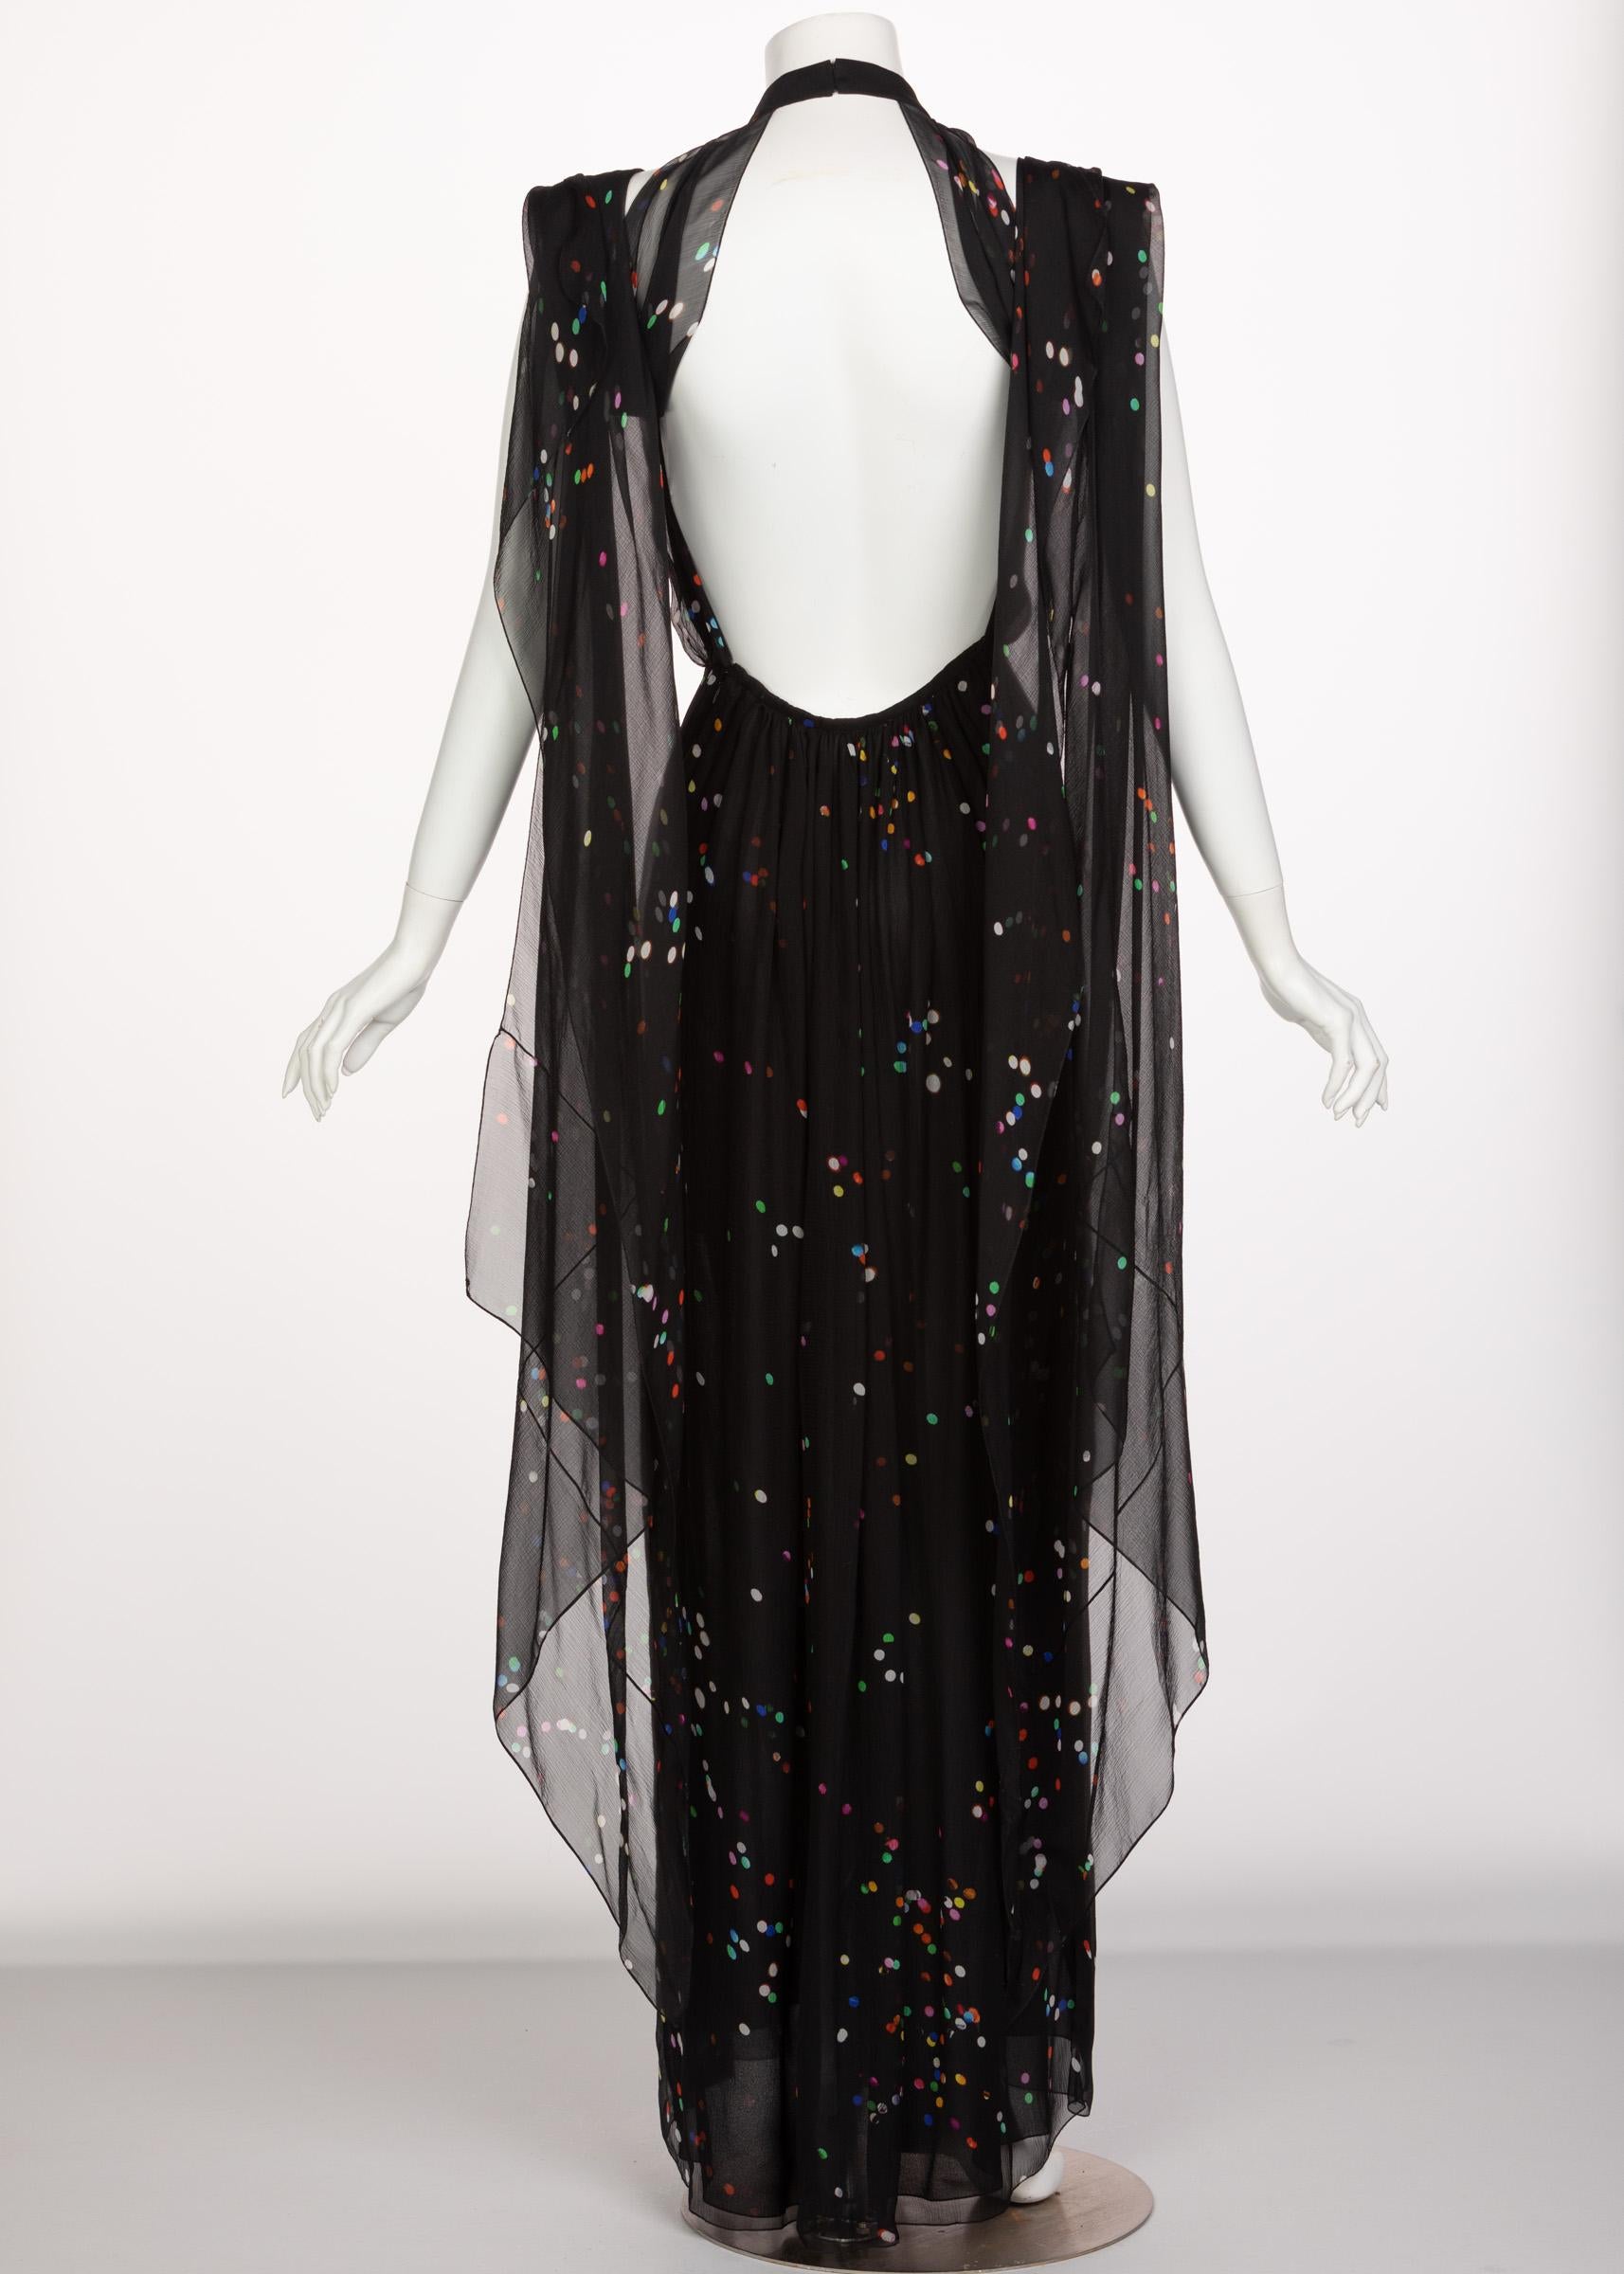 Givenchy Black Confetti Print Silk Cut-Out Back Gown, 2014 1